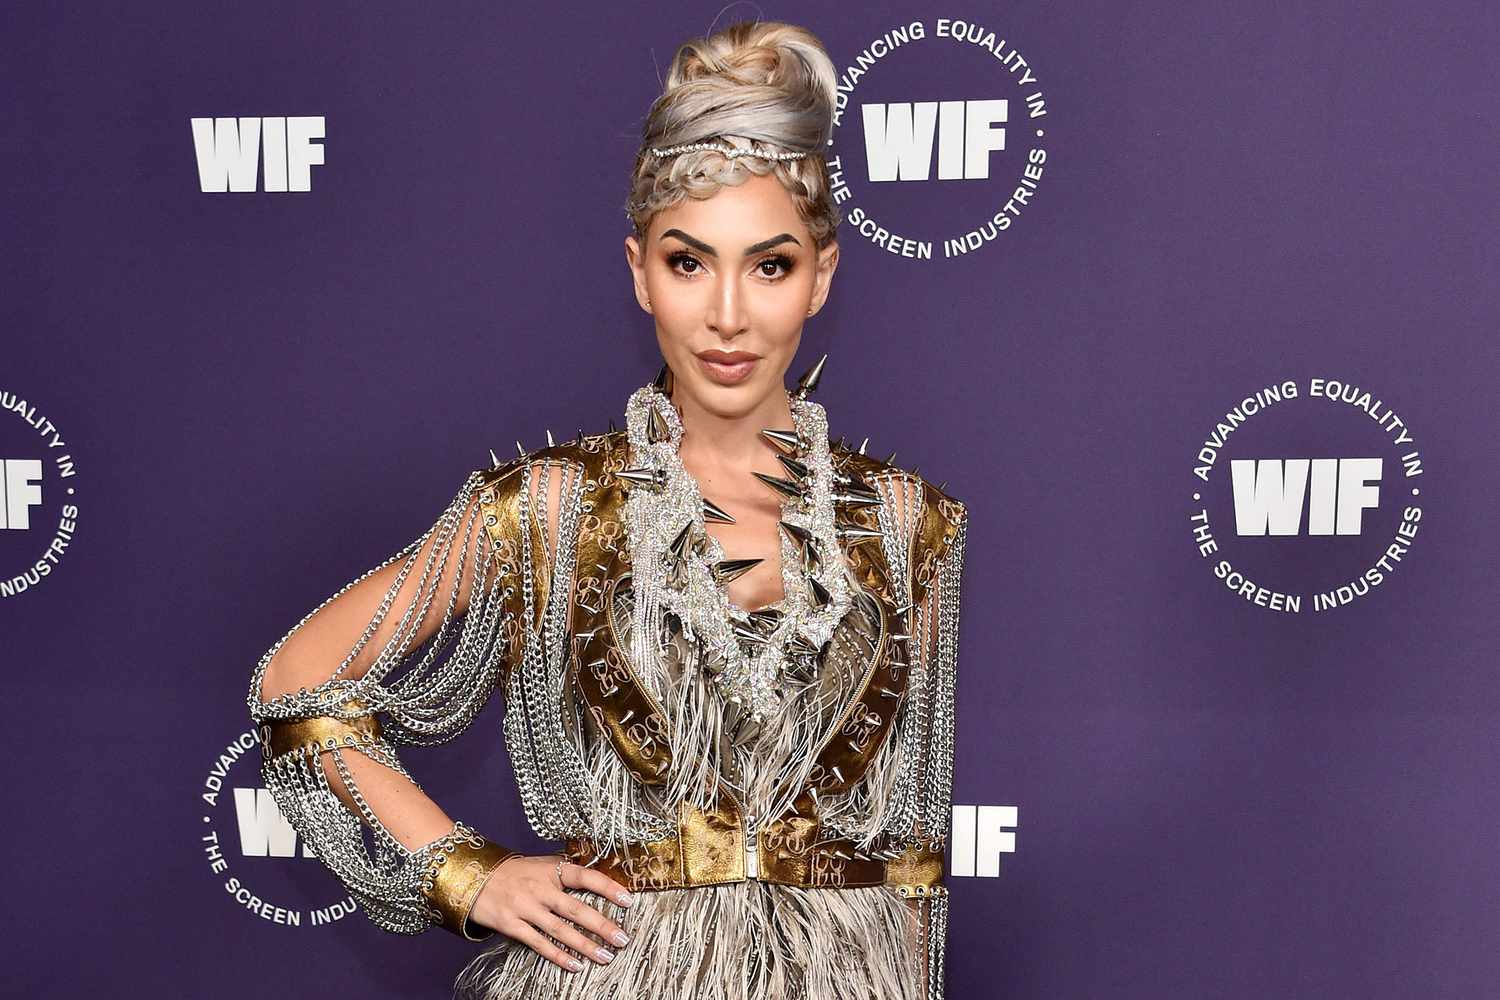 Farrah Abraham Denies Illegal Activity With New Boyfriend, Urges An End To CPS Threats